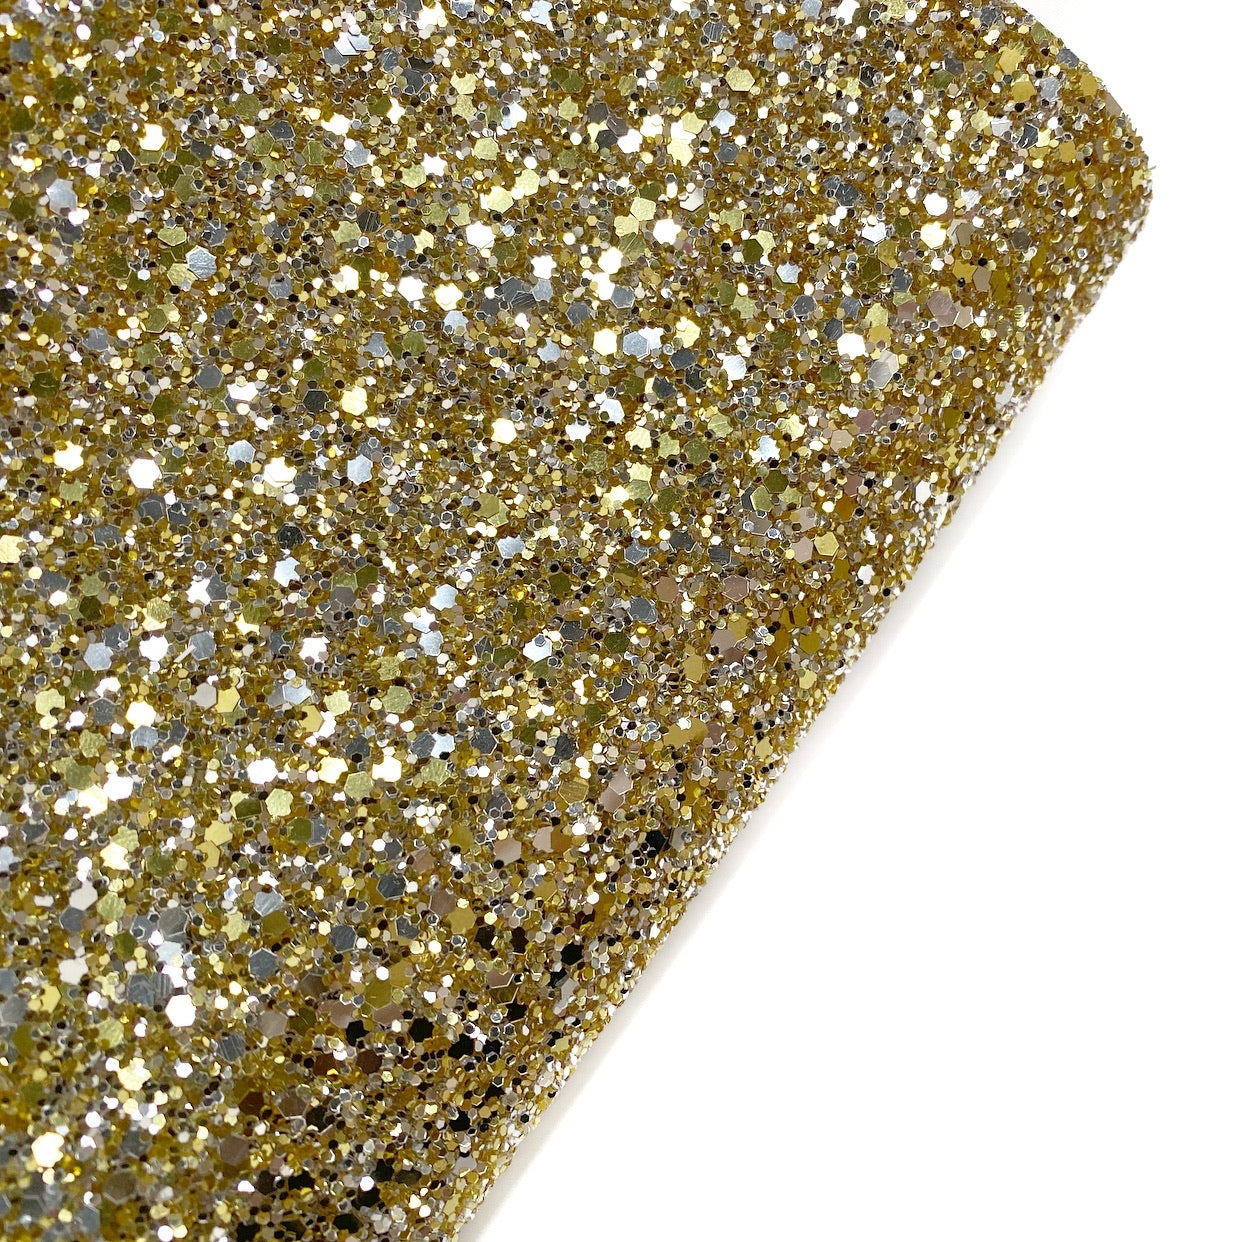 Gold & Silver Speckled Lux Premium Chunky Glitter Fabric